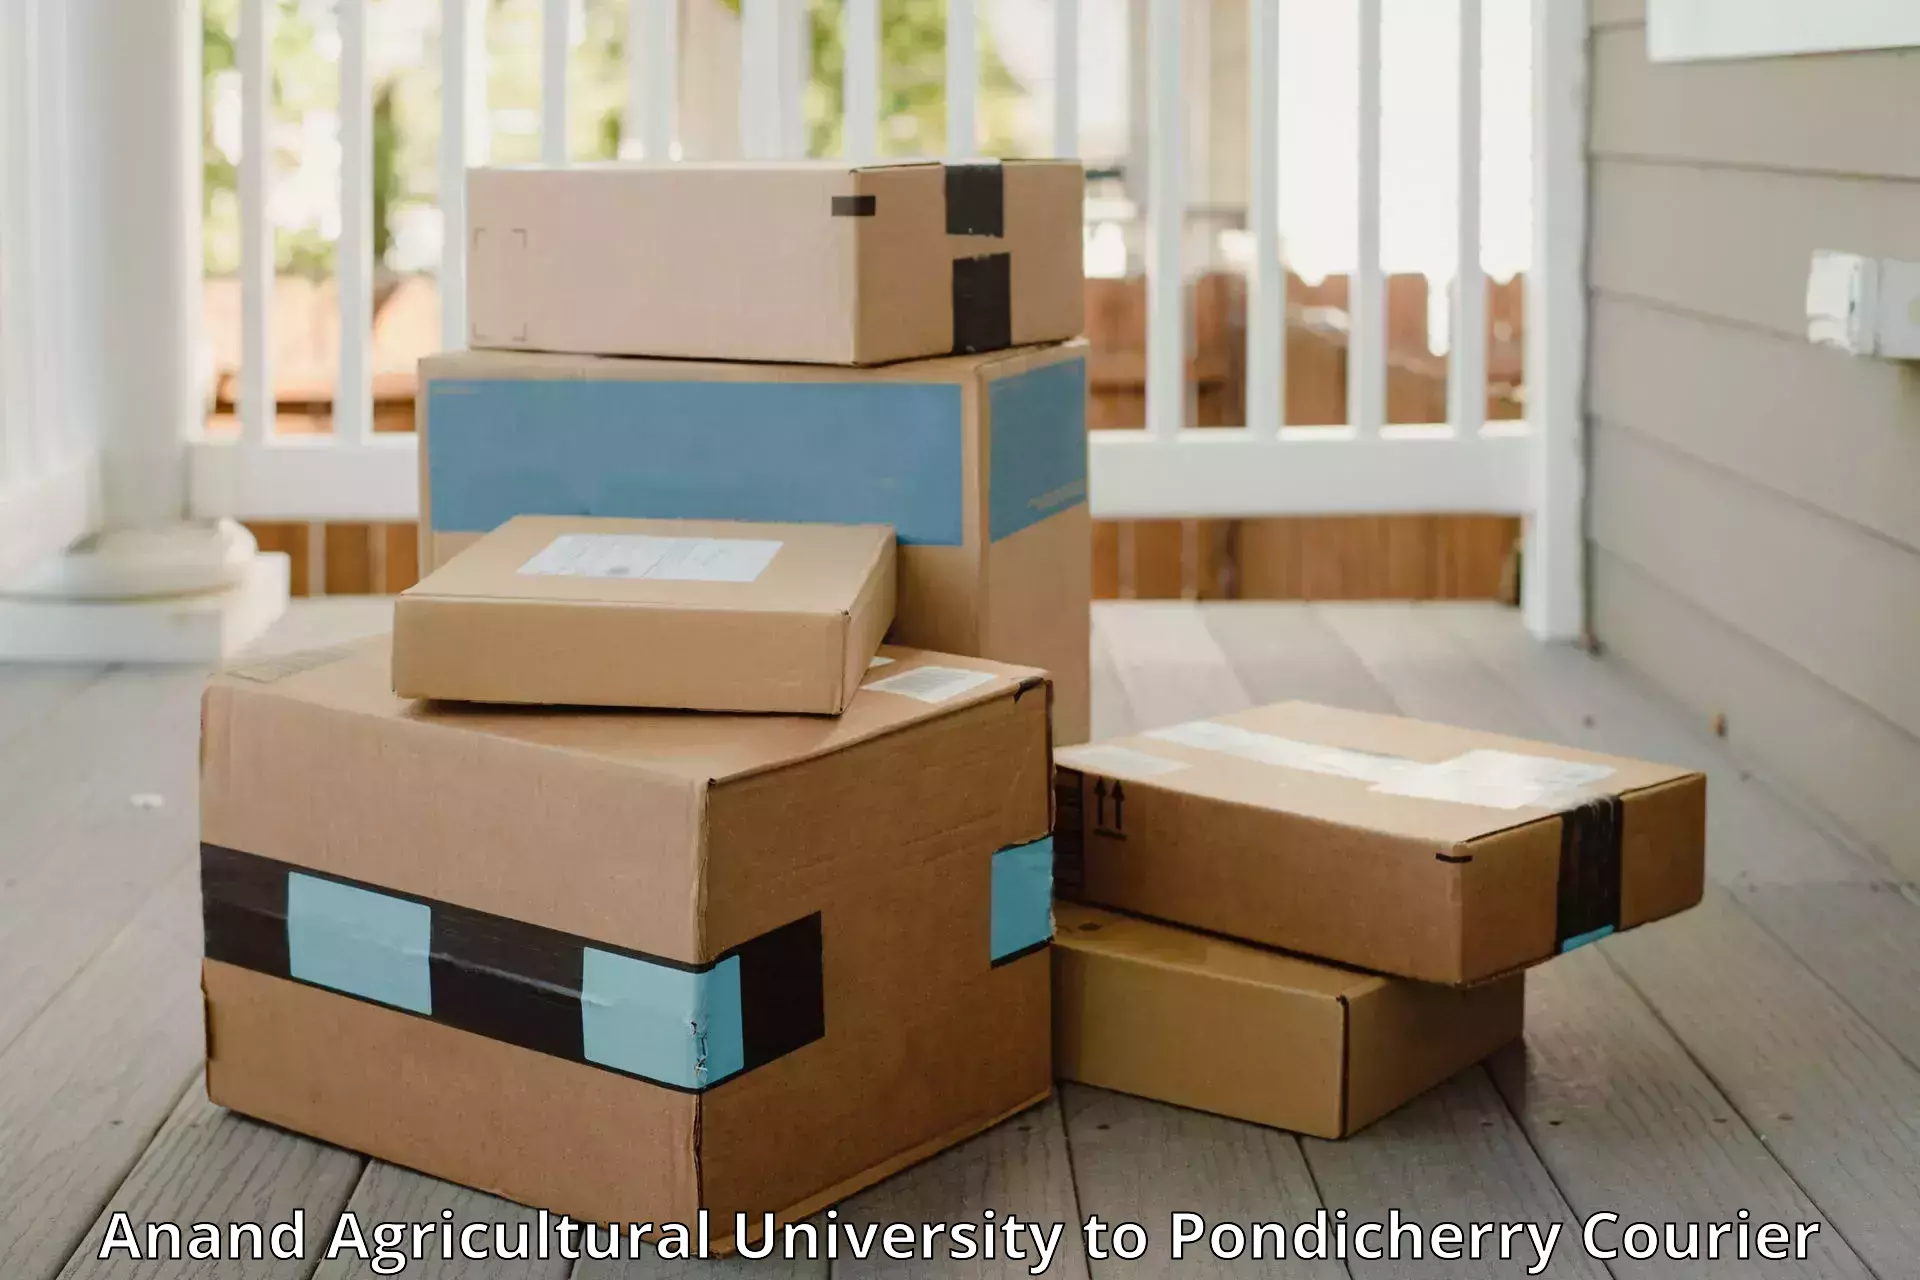 Baggage transport professionals Anand Agricultural University to Pondicherry